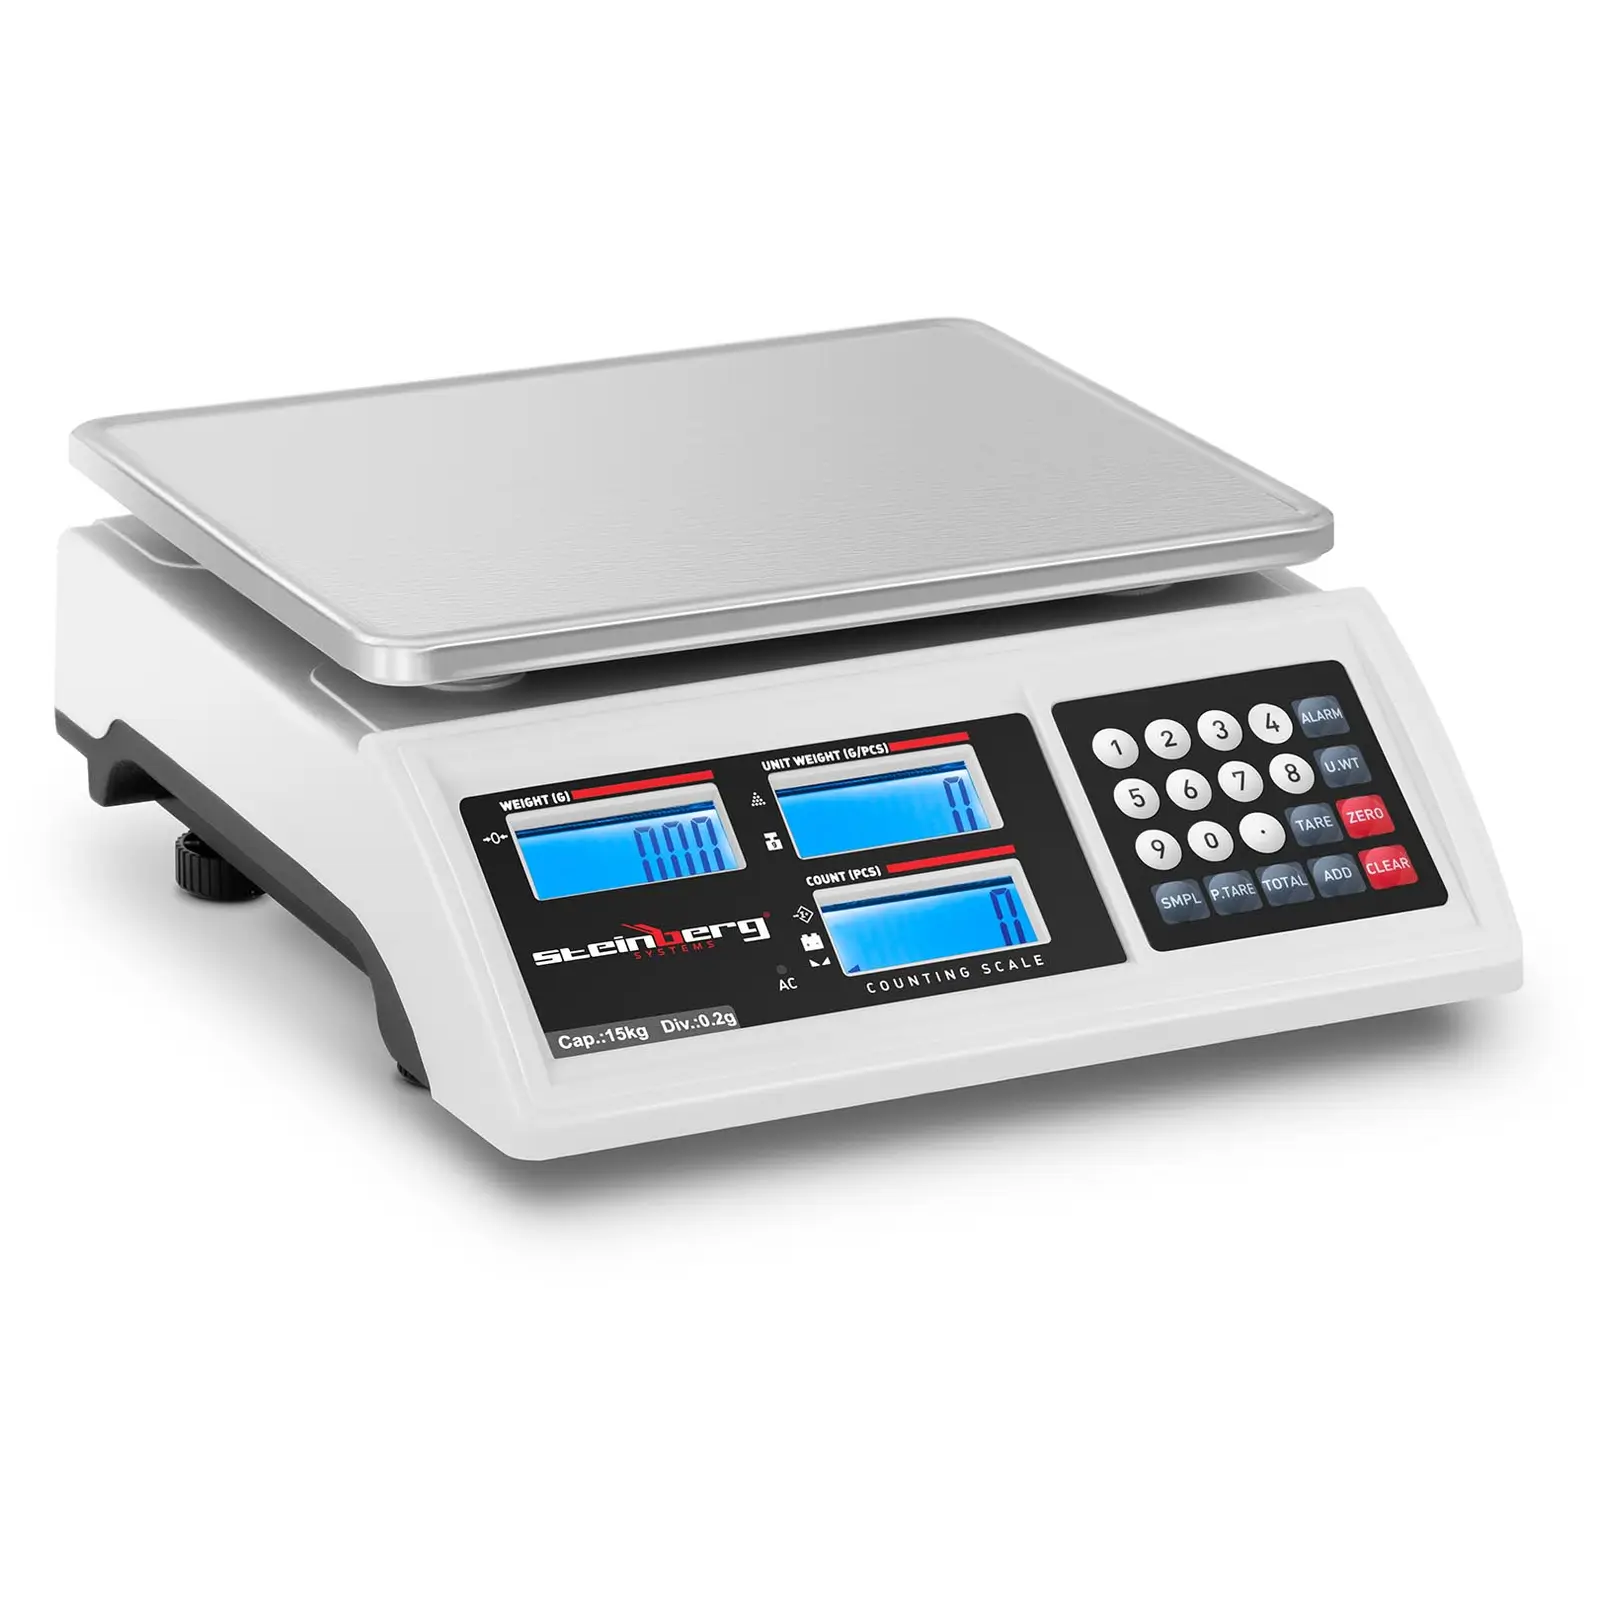 Factory second Counting Scale - 15 kg / 0.2 g - battery 80 hrs